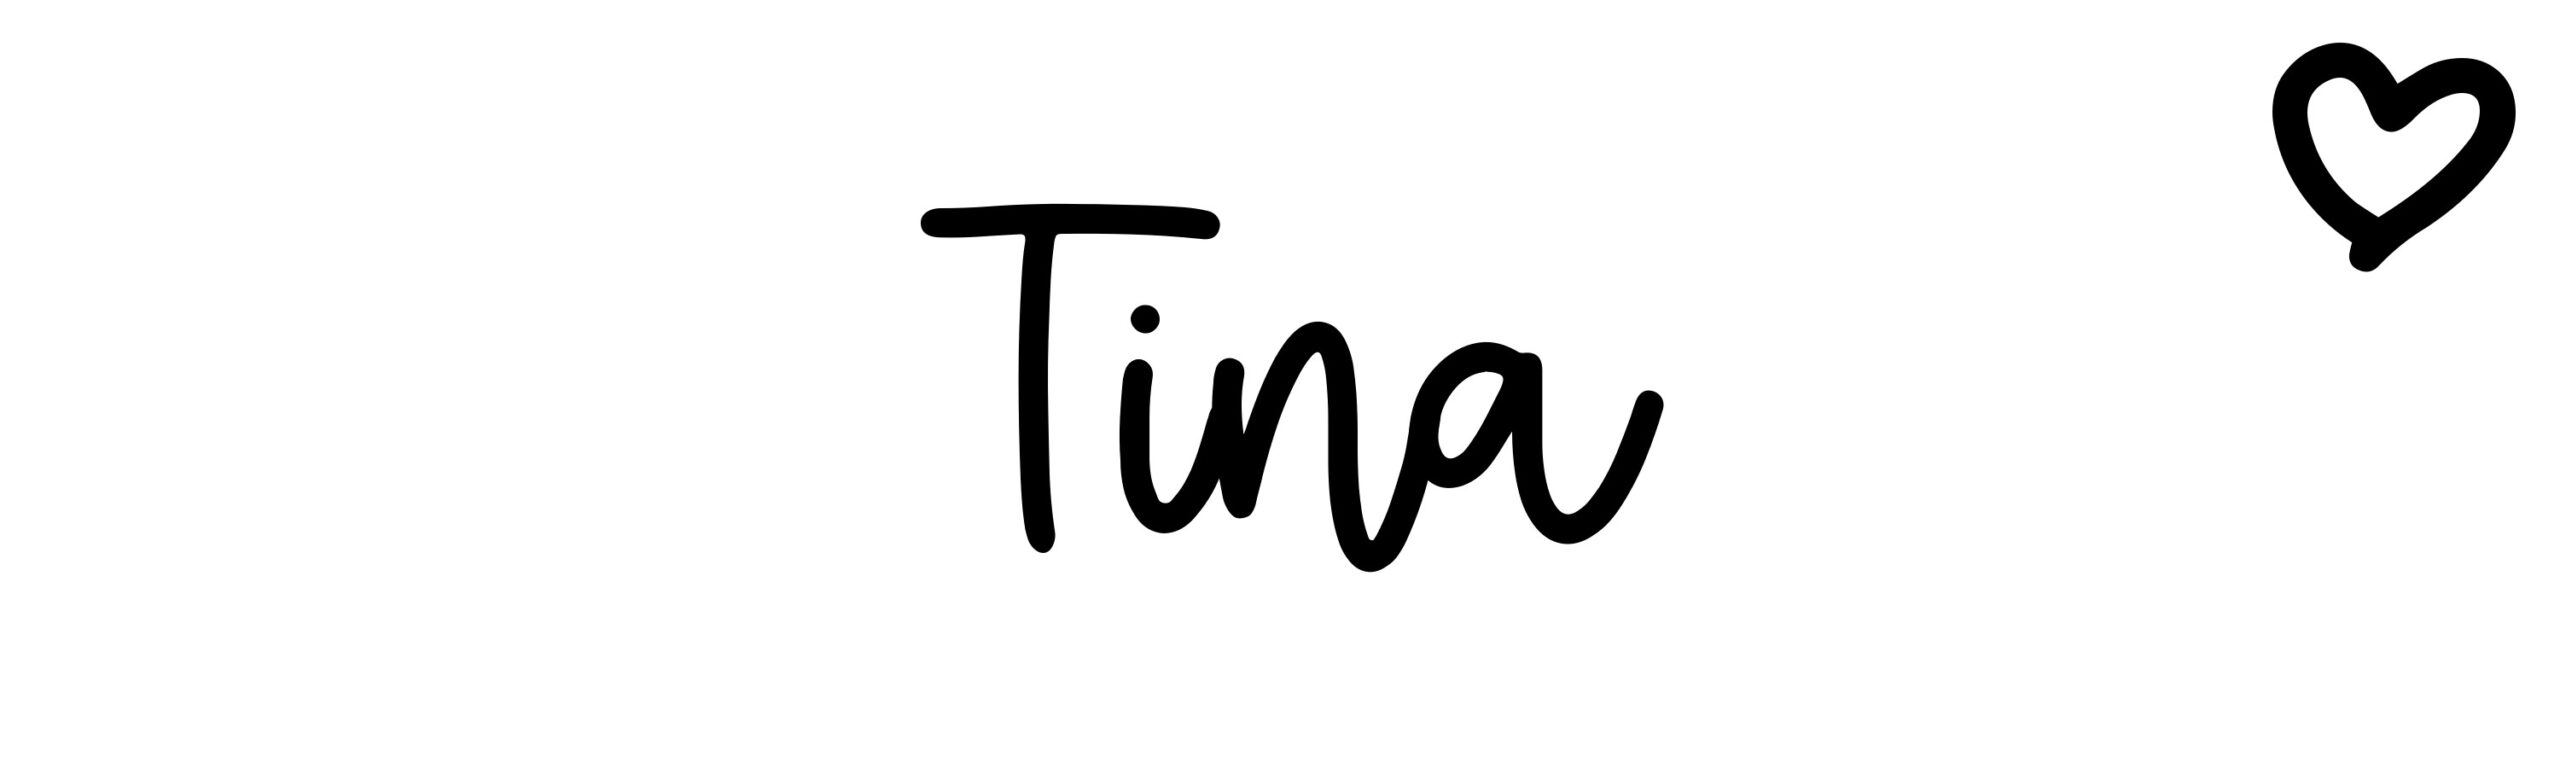 Tina - Name meaning, origin, variations and more